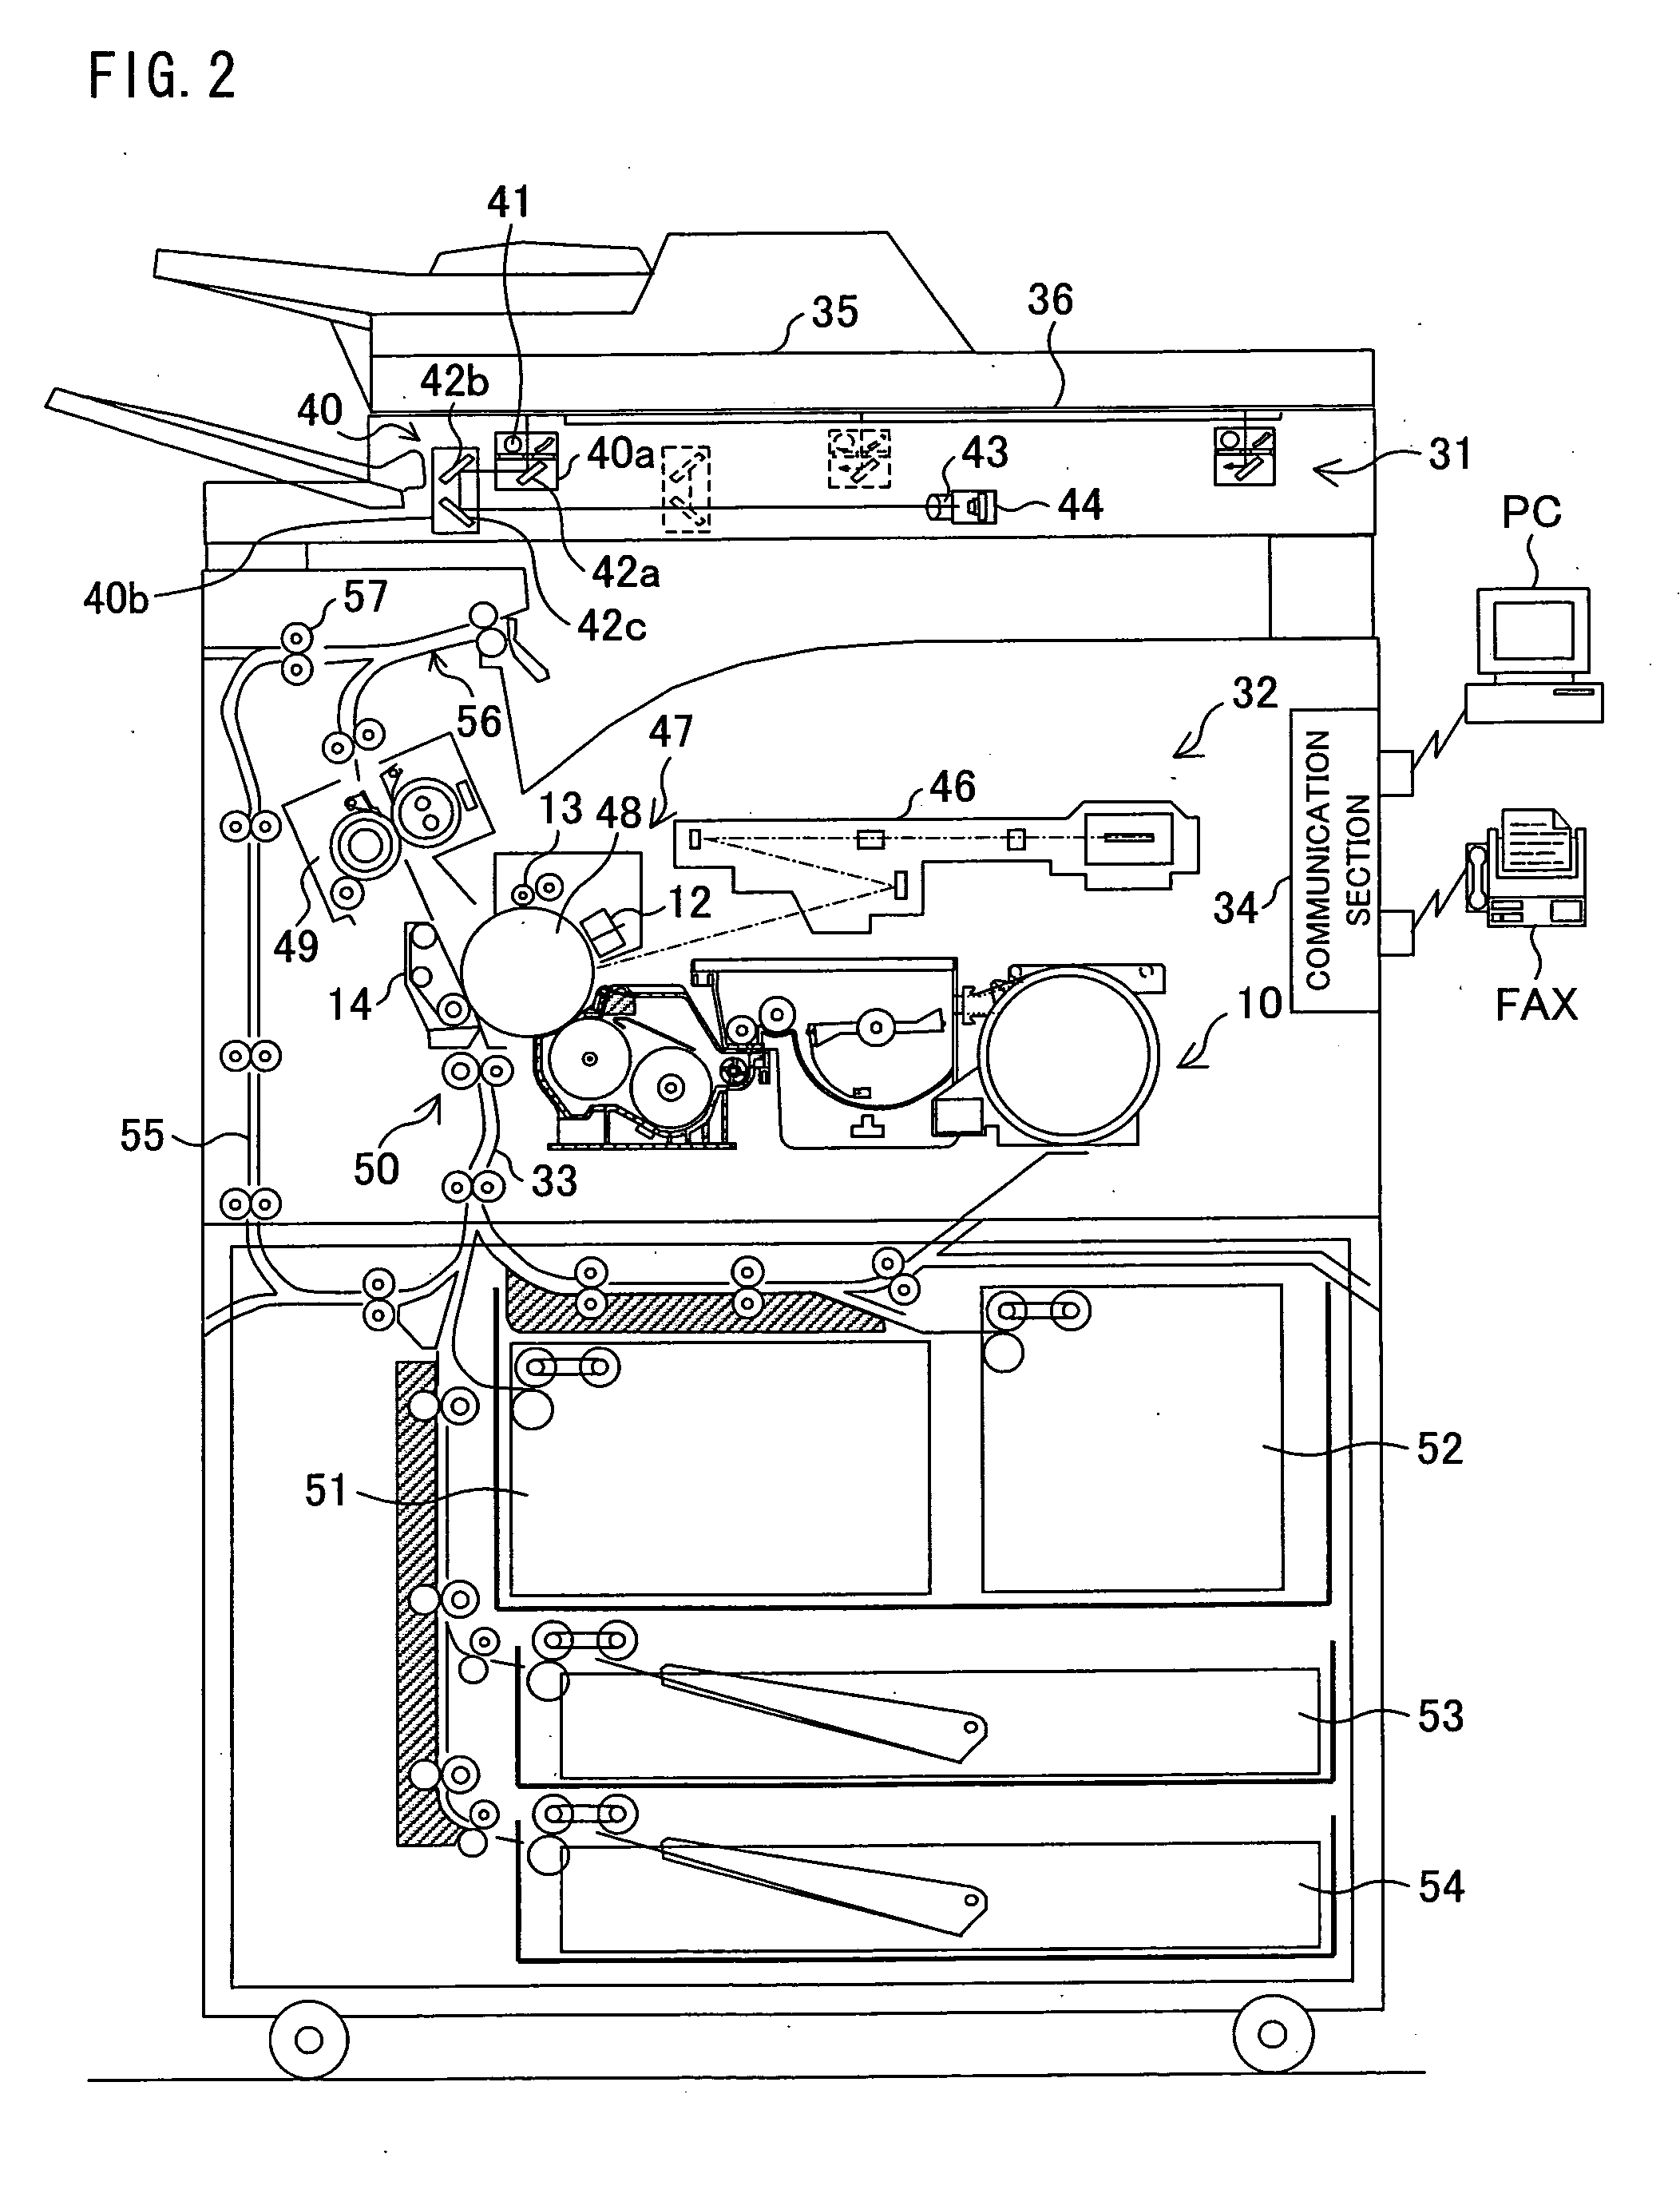 Image forming apparatus, toner density control method, toner density control program and storage medium for storing the program